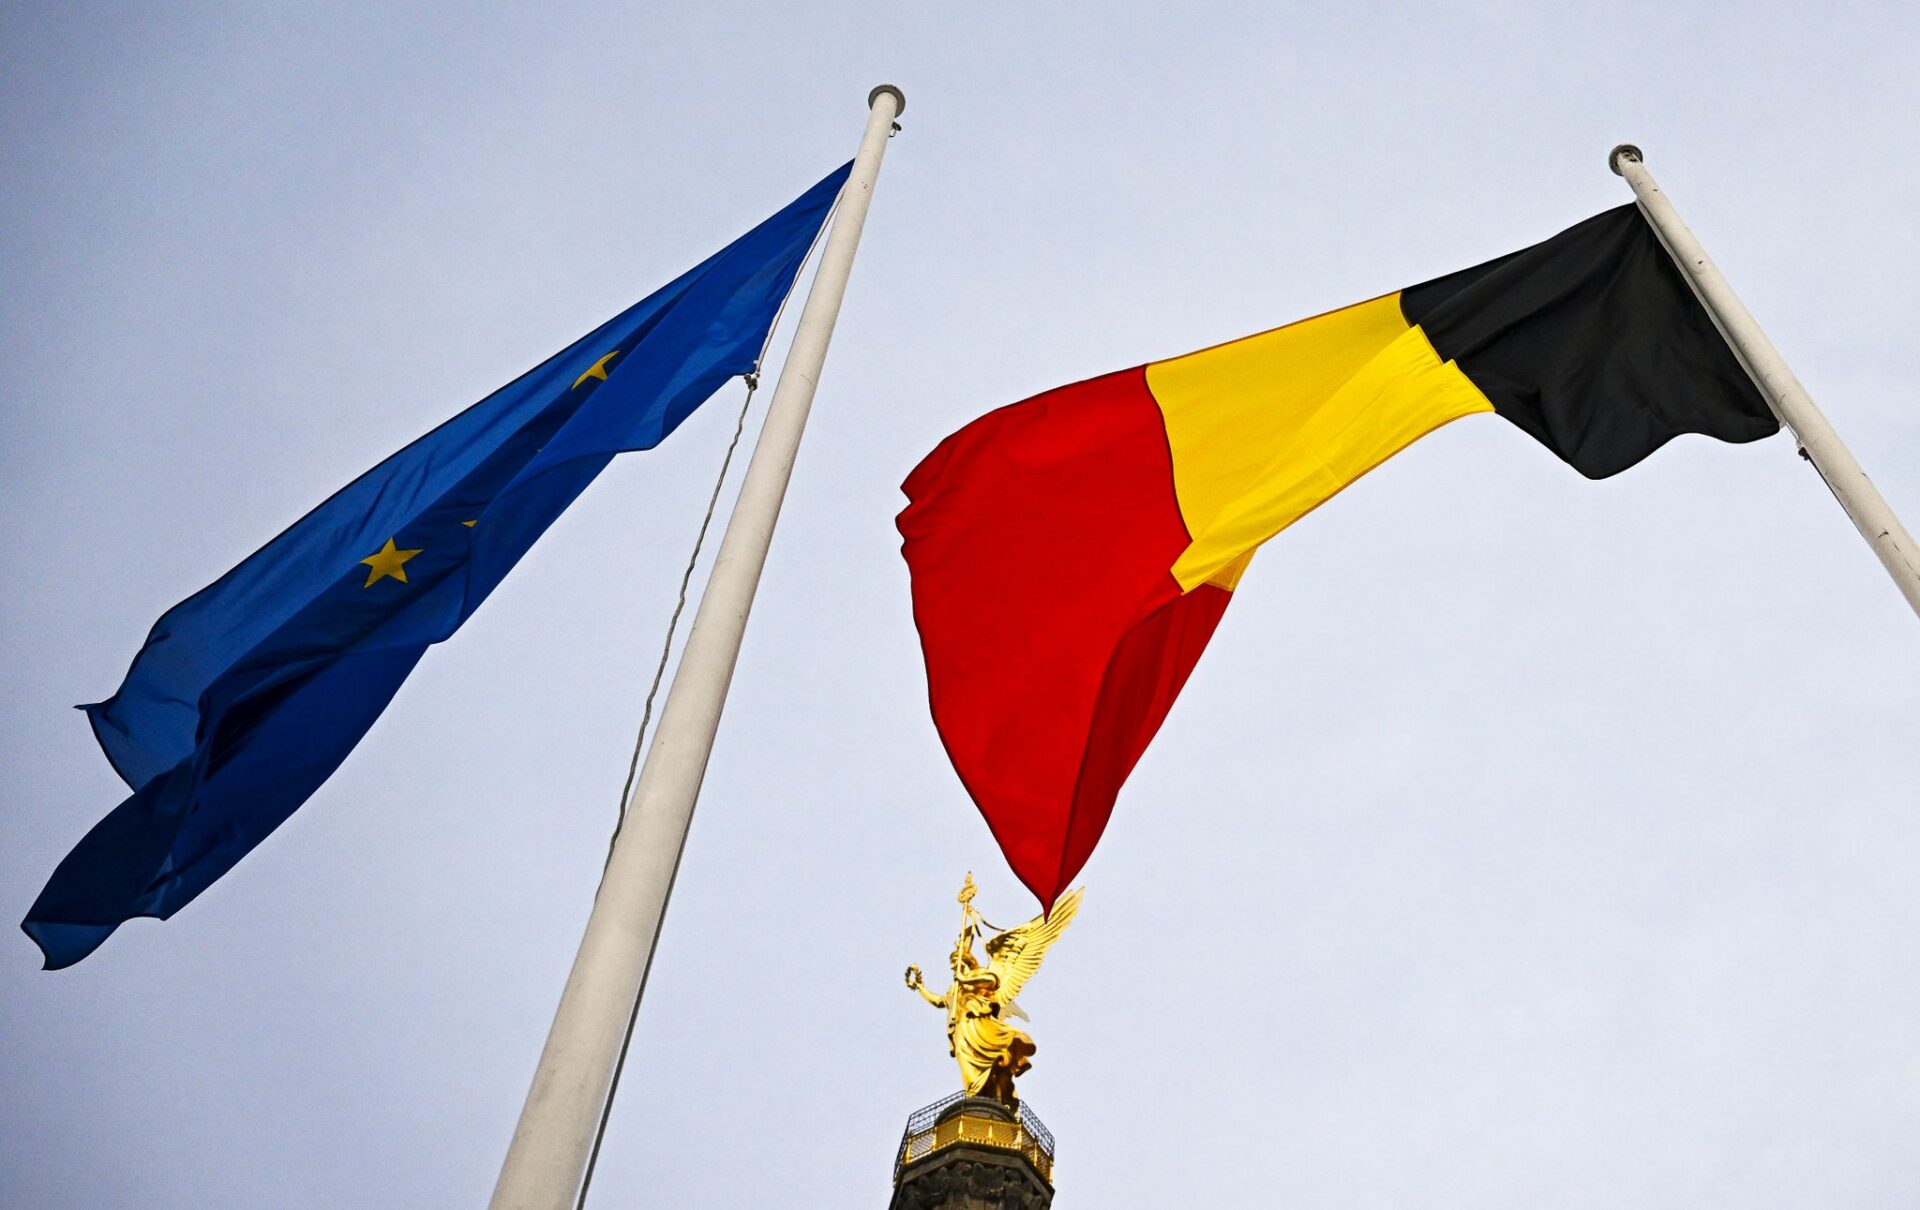 Europe in brief: Belgian EU Presidency to push for agreement on platform workers directive